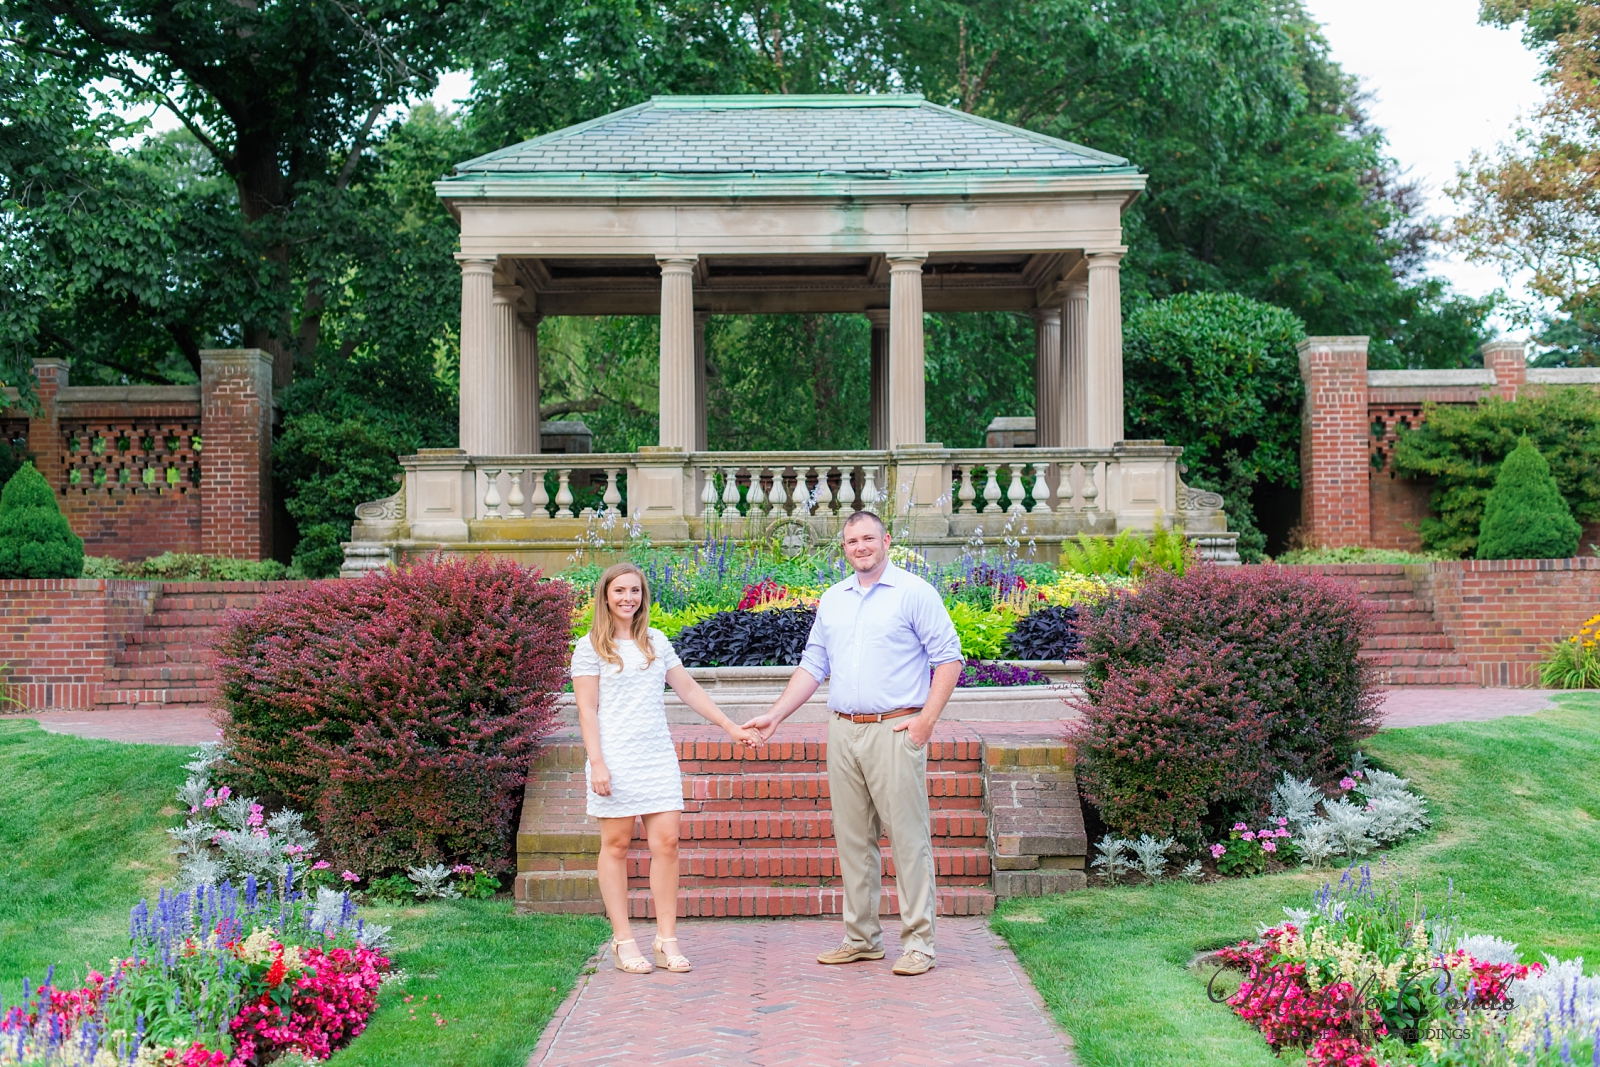 Lynch Park Engagement Session, Beverly MA Diana + Steve Michele